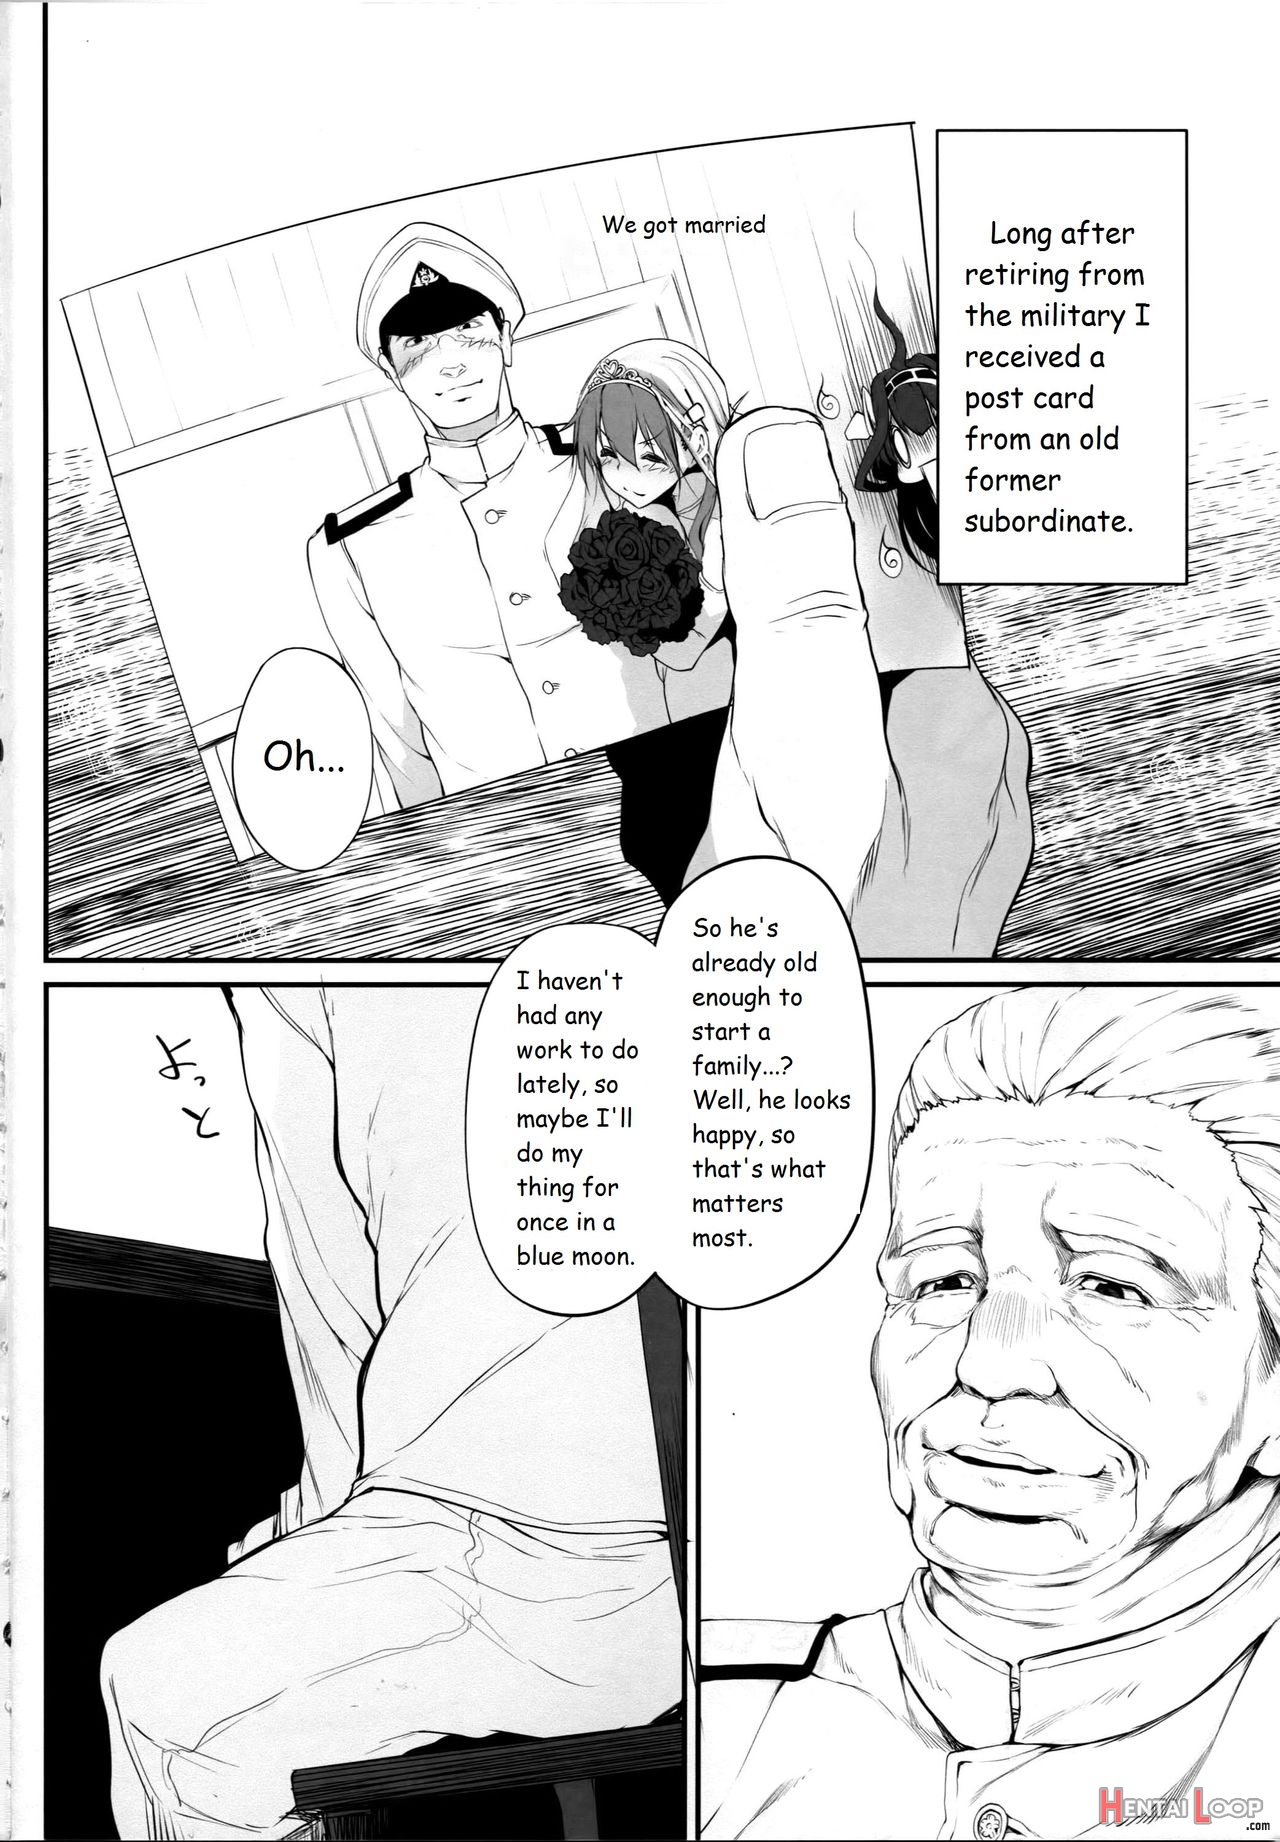 Marked Girls Vol. 1 page 2